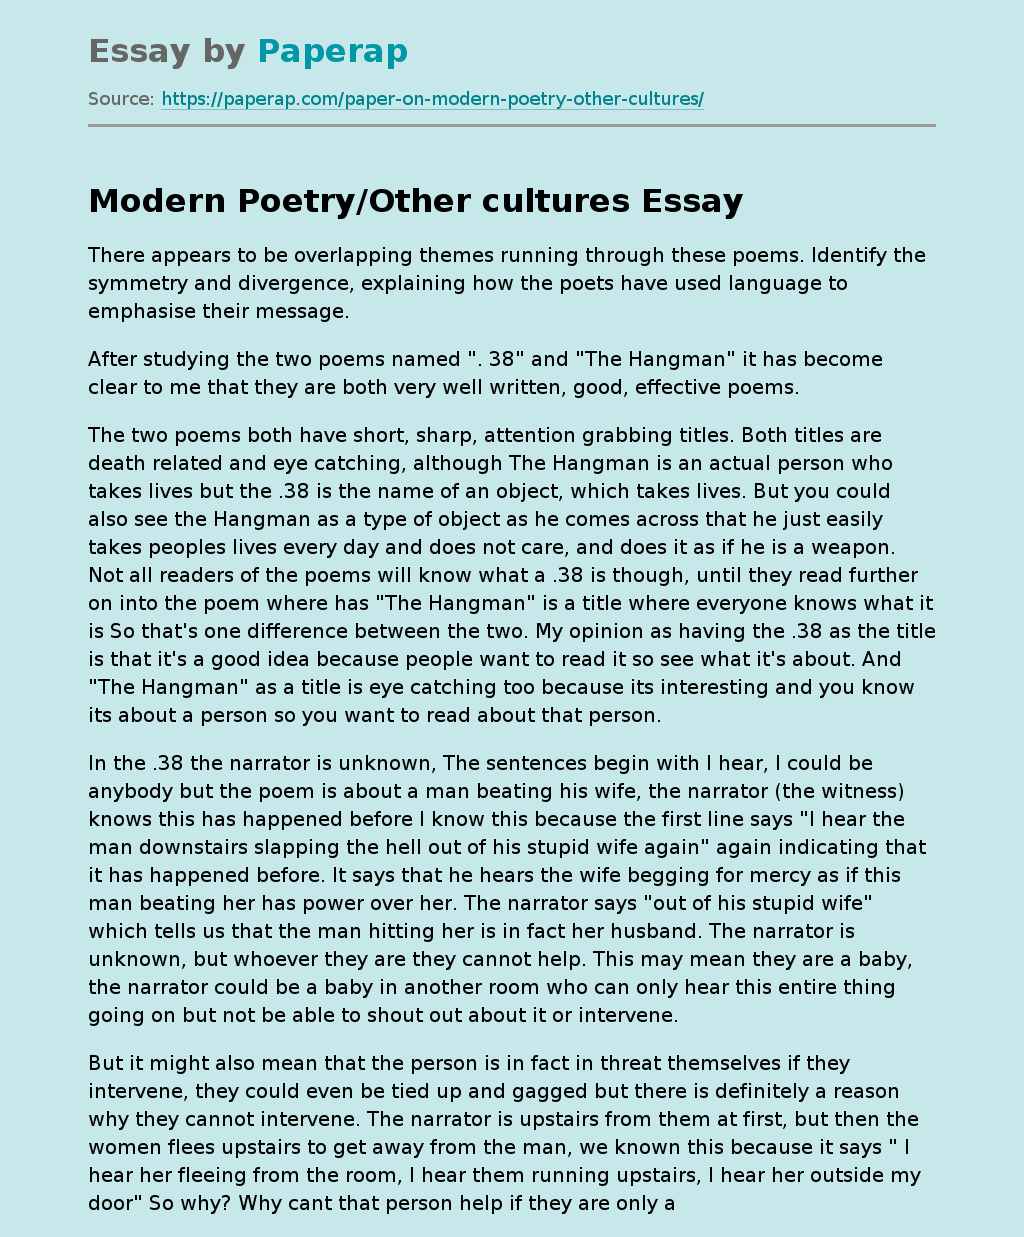 Modern Poetry/Other cultures